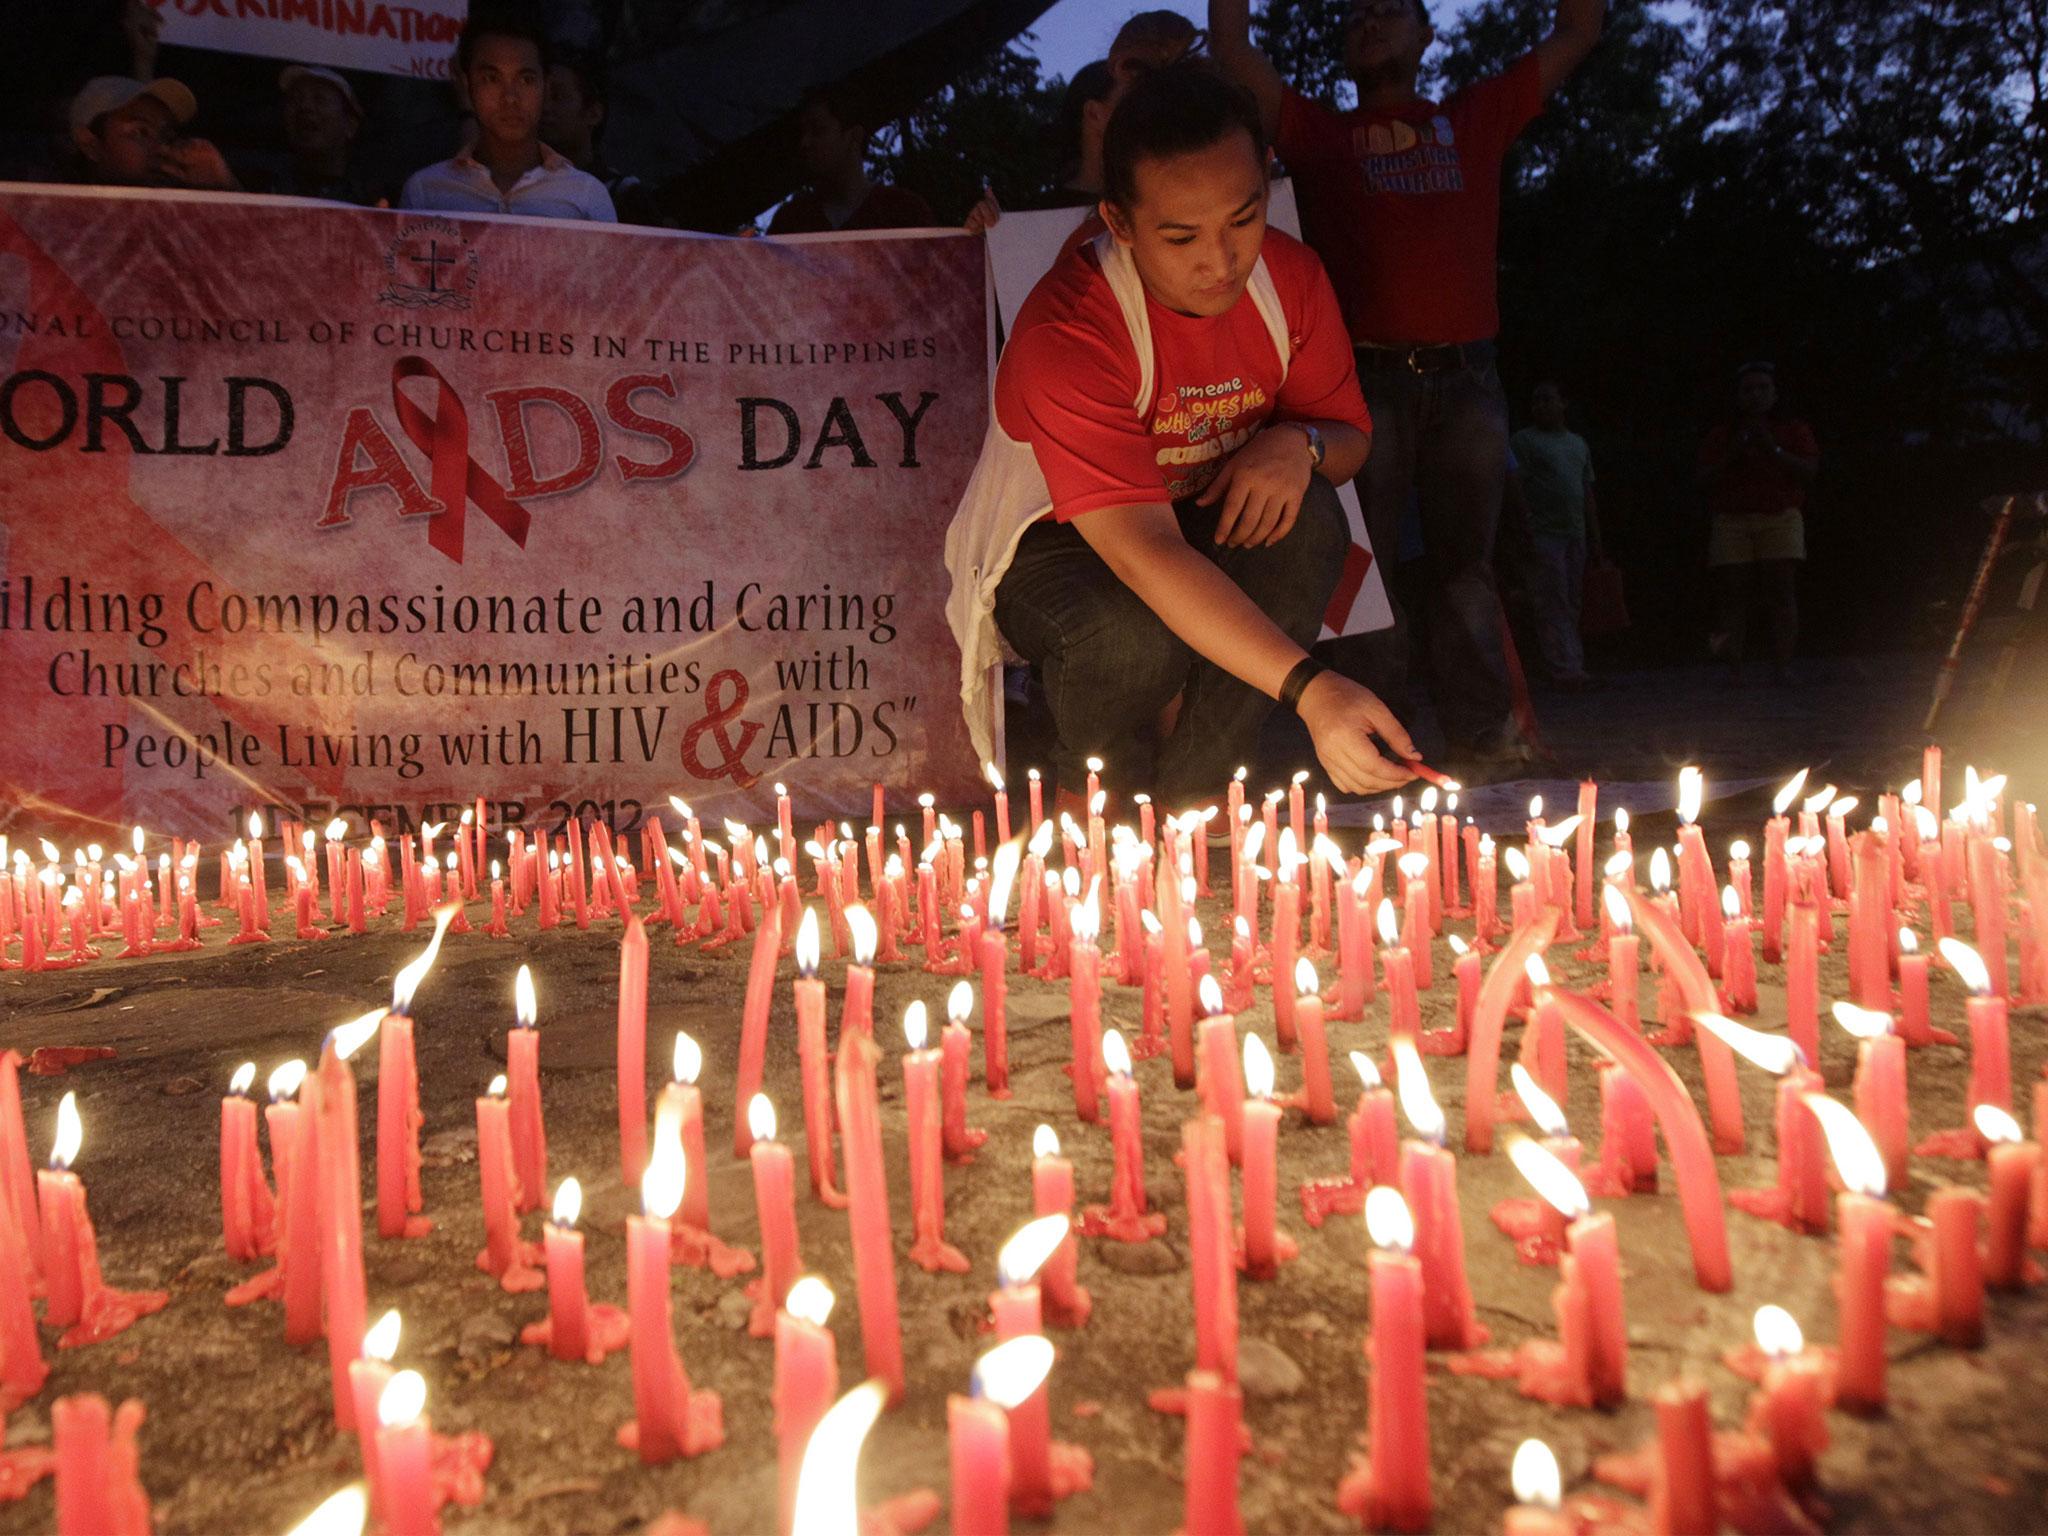 Around 5,000 people in the Philippines were living with HIV in 2006, compared to around 56,000 in 2016, according to UN figures